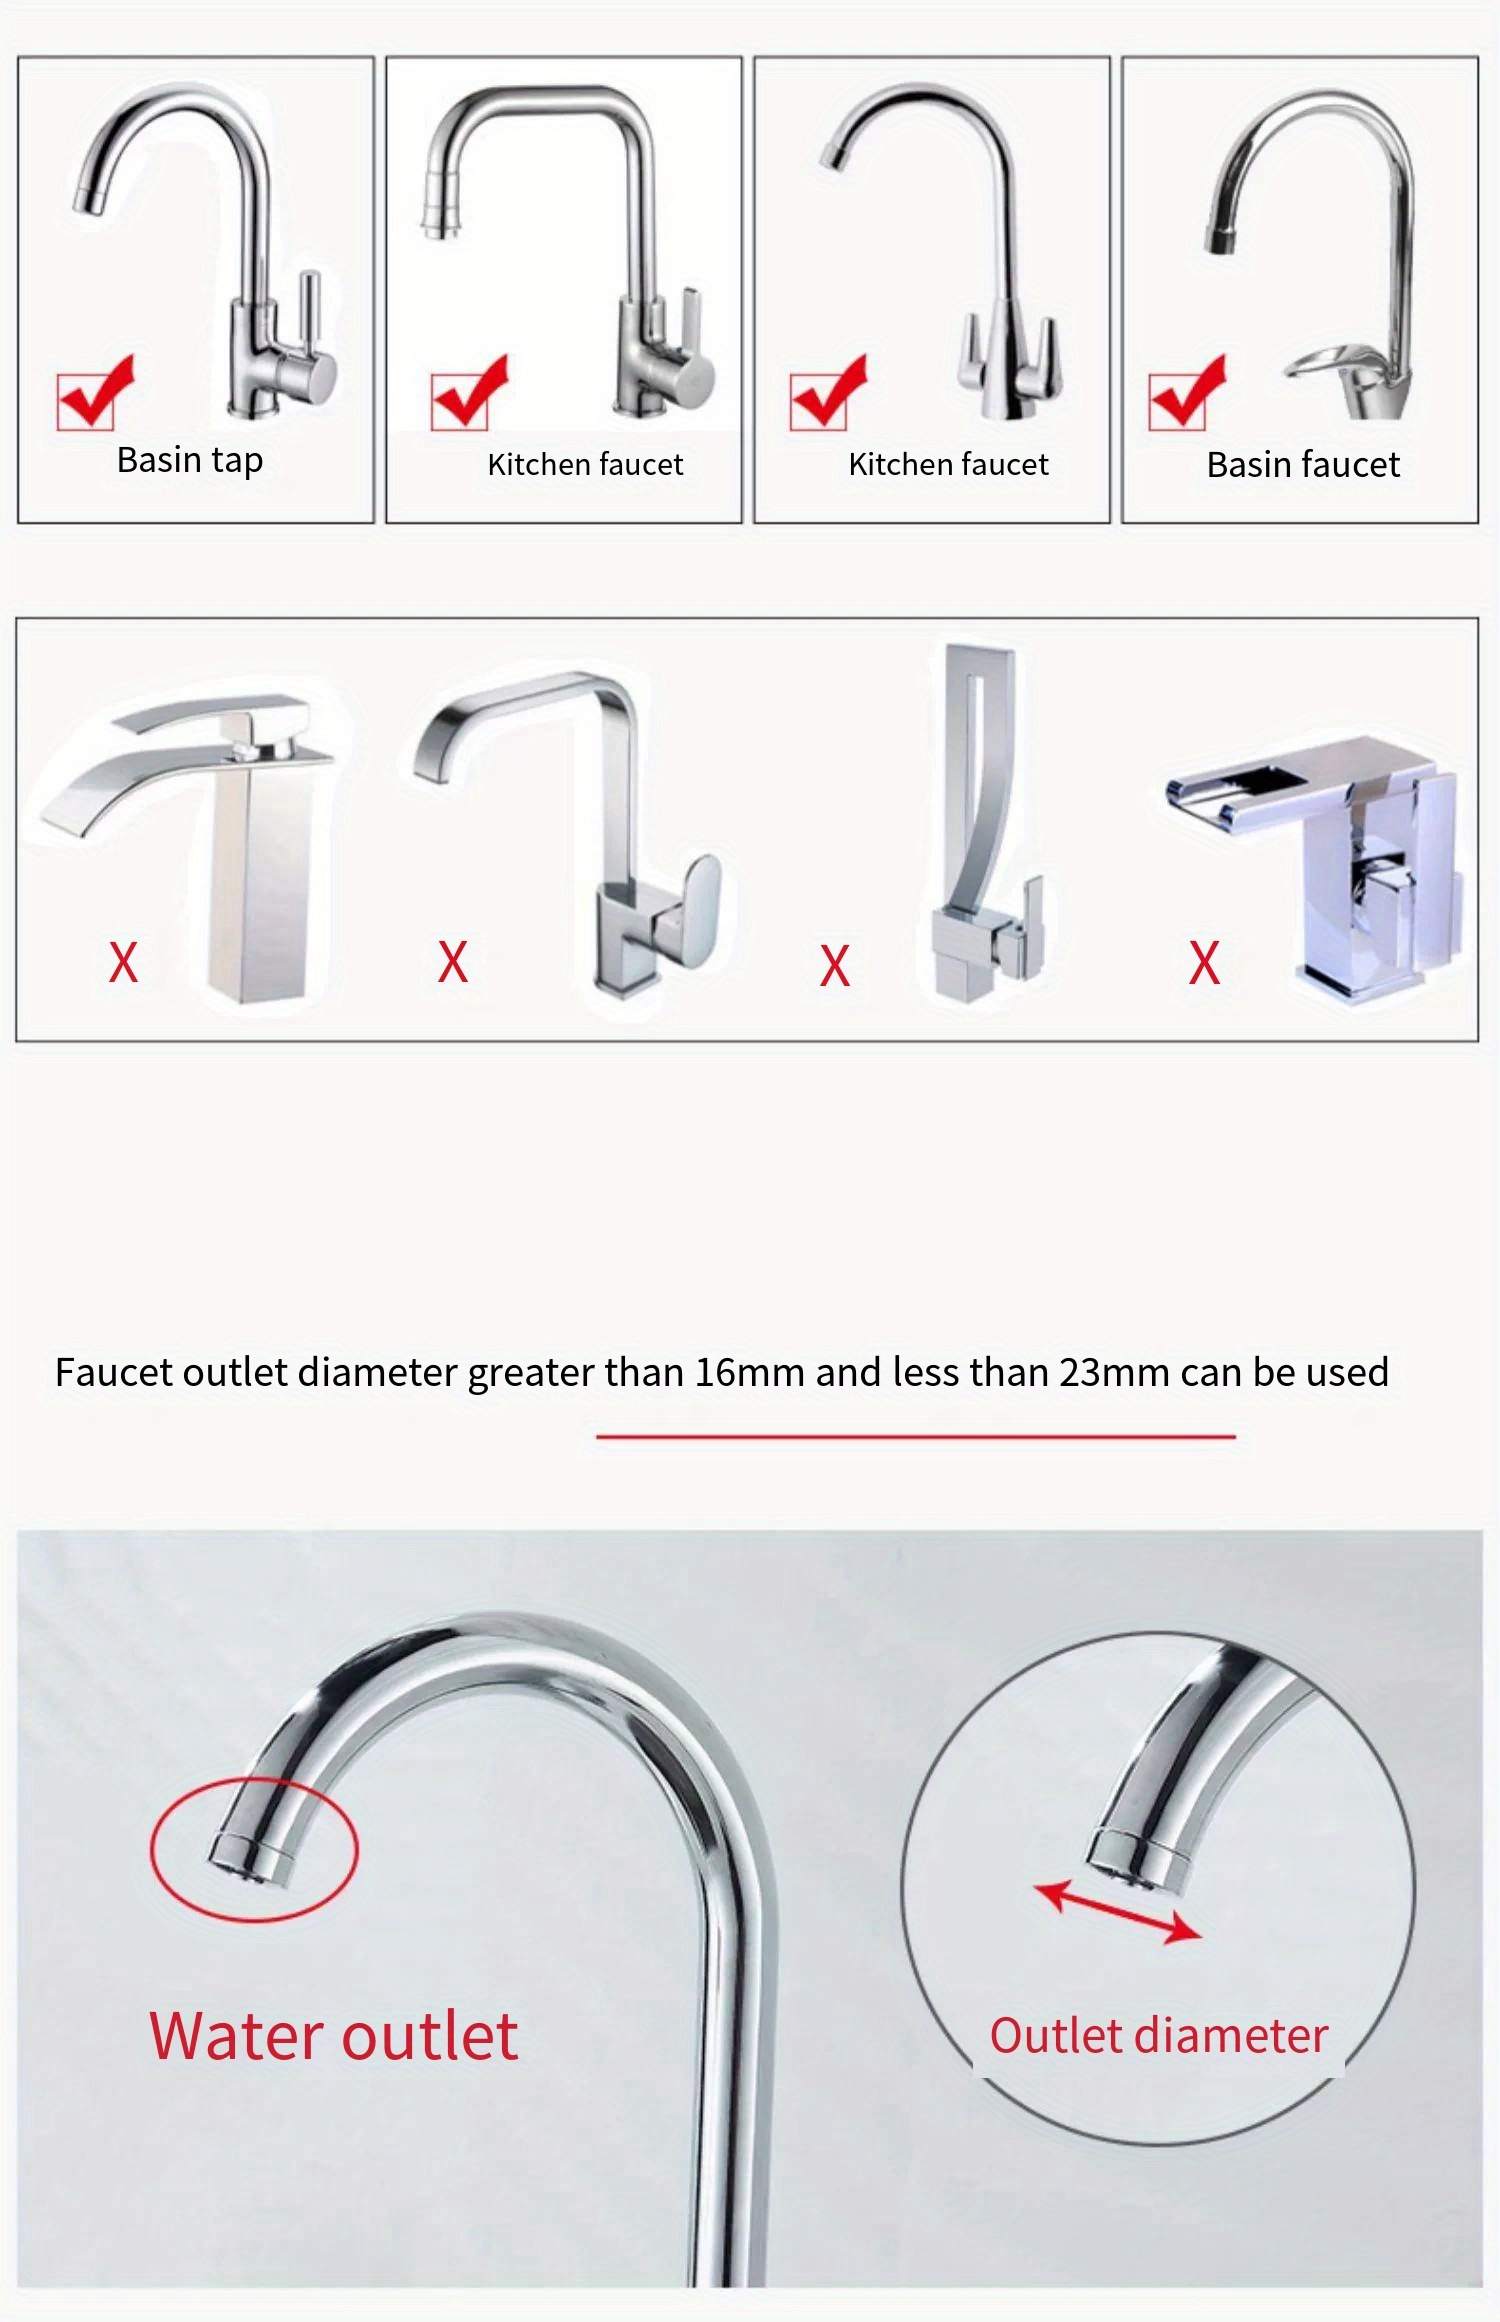 1pc faucet water filters faucet anti splash head kitchen water purification filter retractable rotating with medical stone water saving shower filter bathroom accessories kitchen accessories faucet accessories details 2